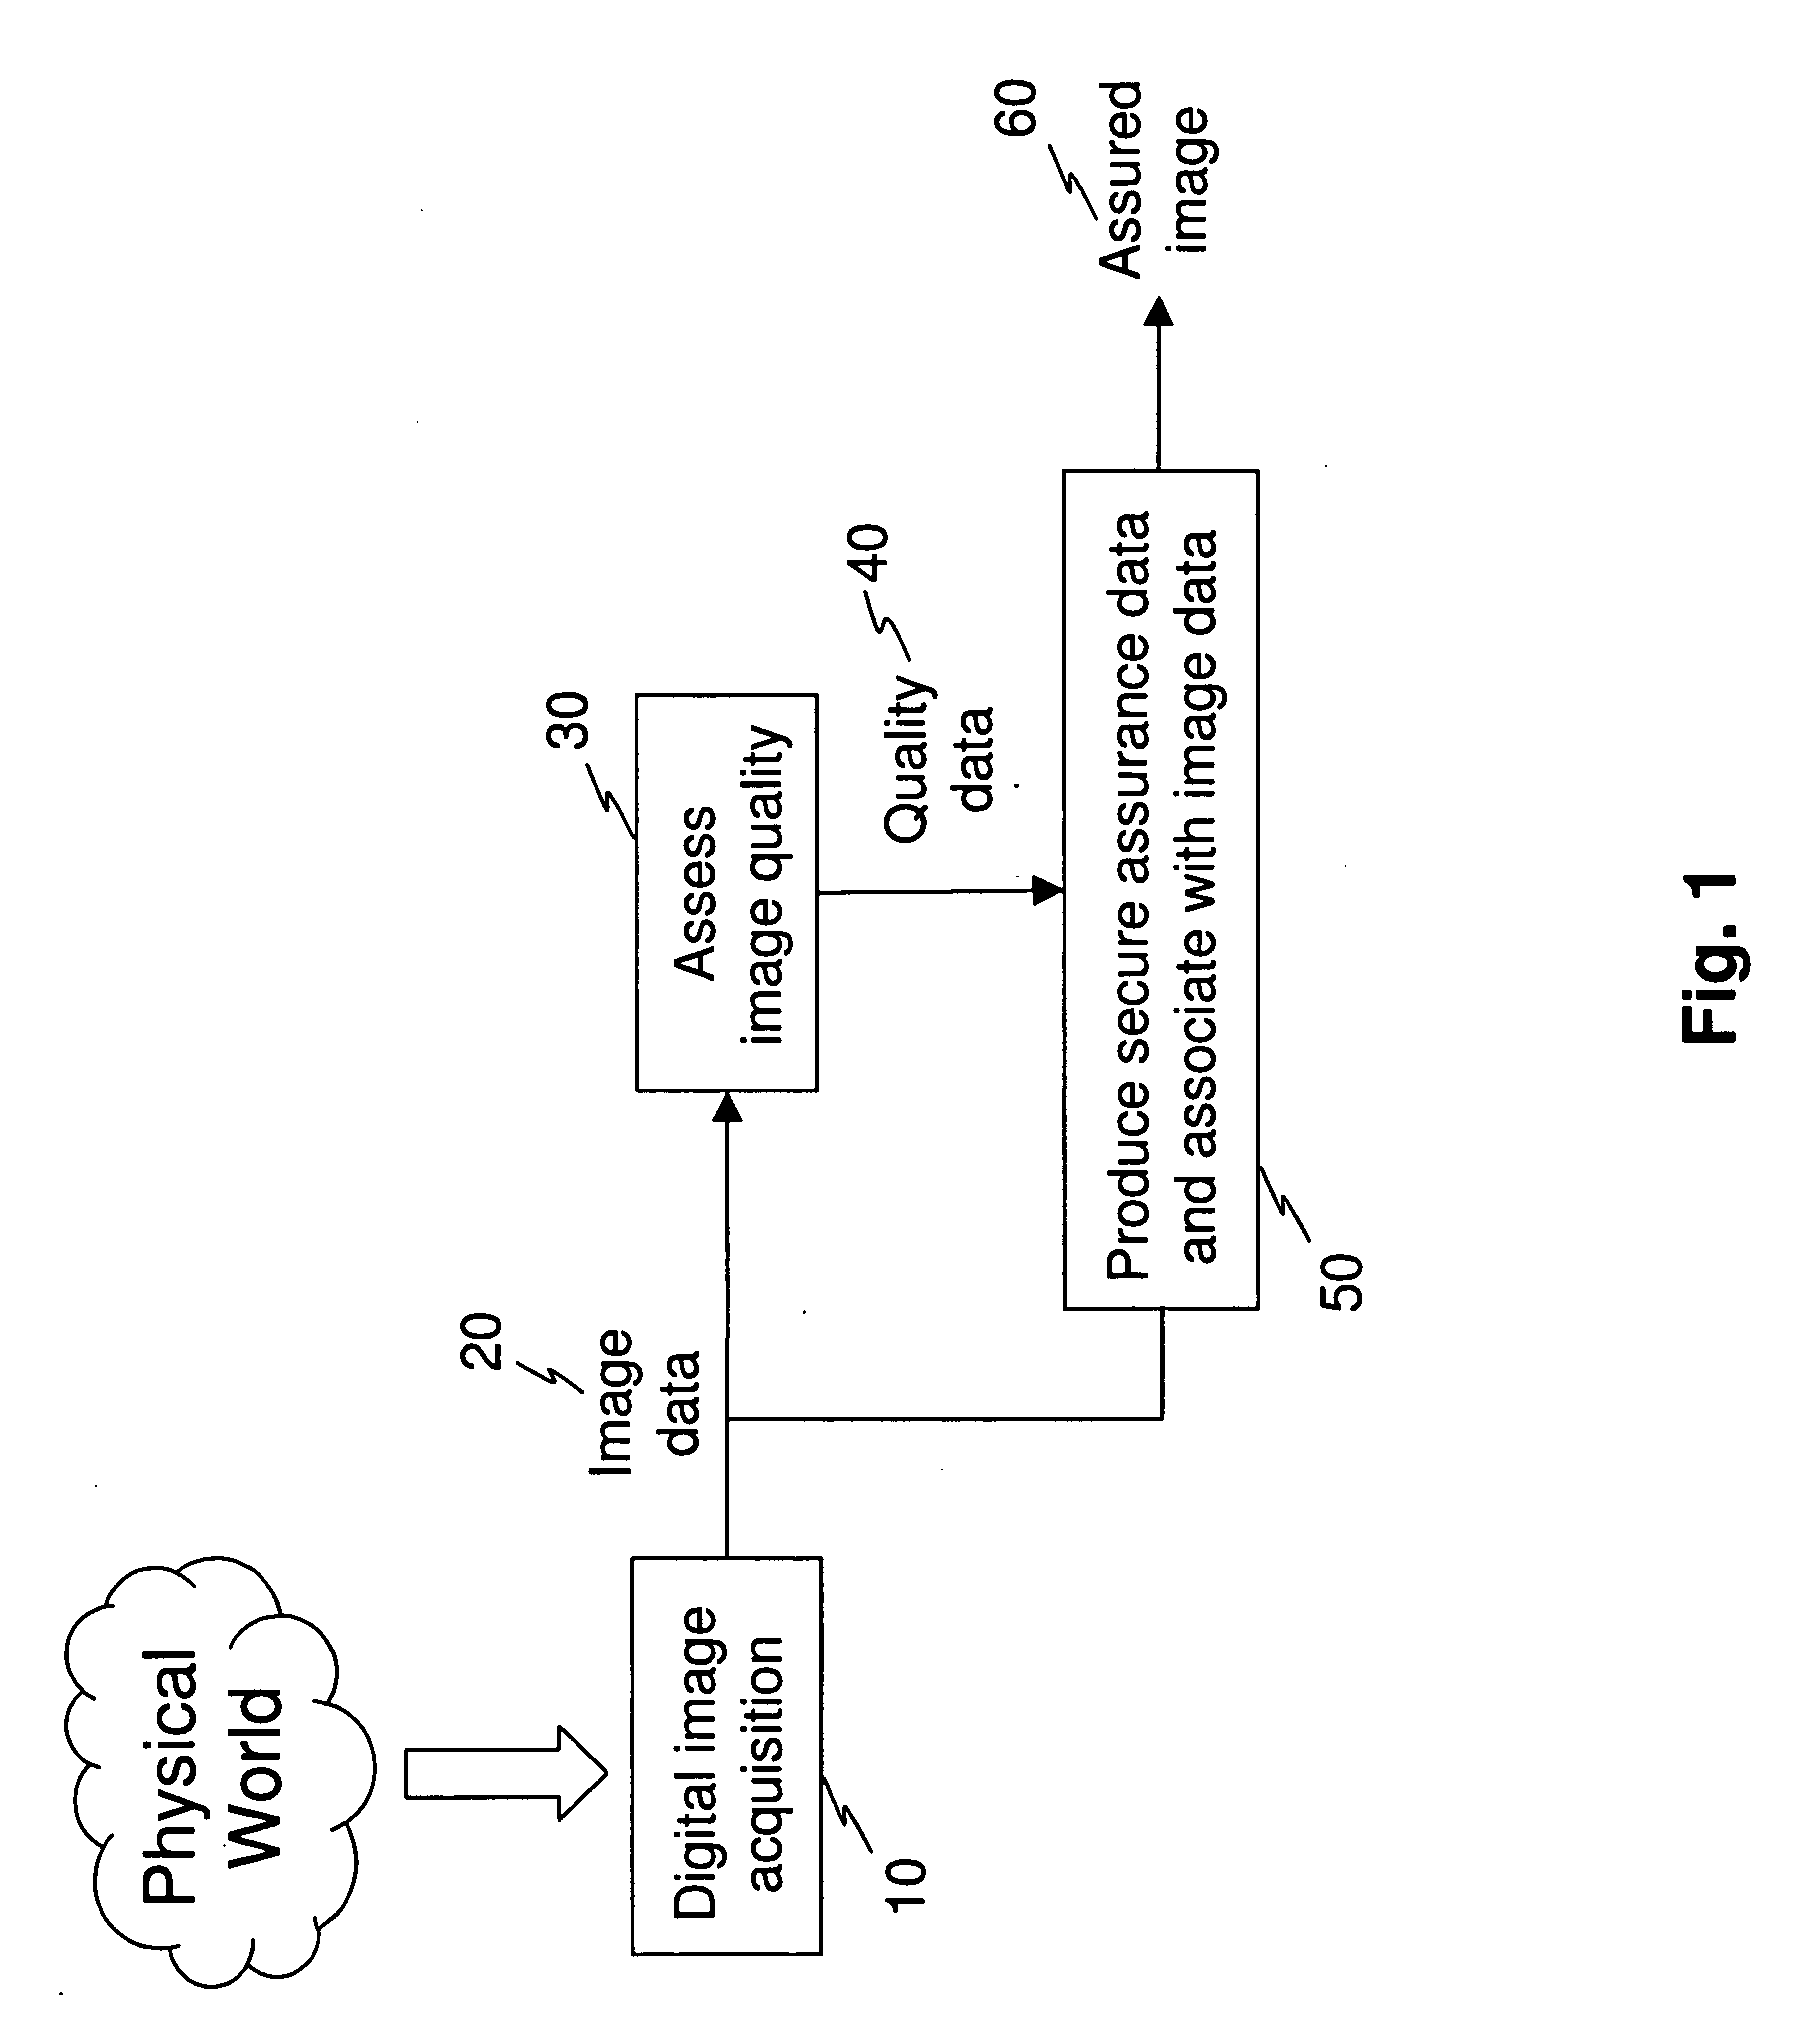 Method for image quality assessment using quality vectors